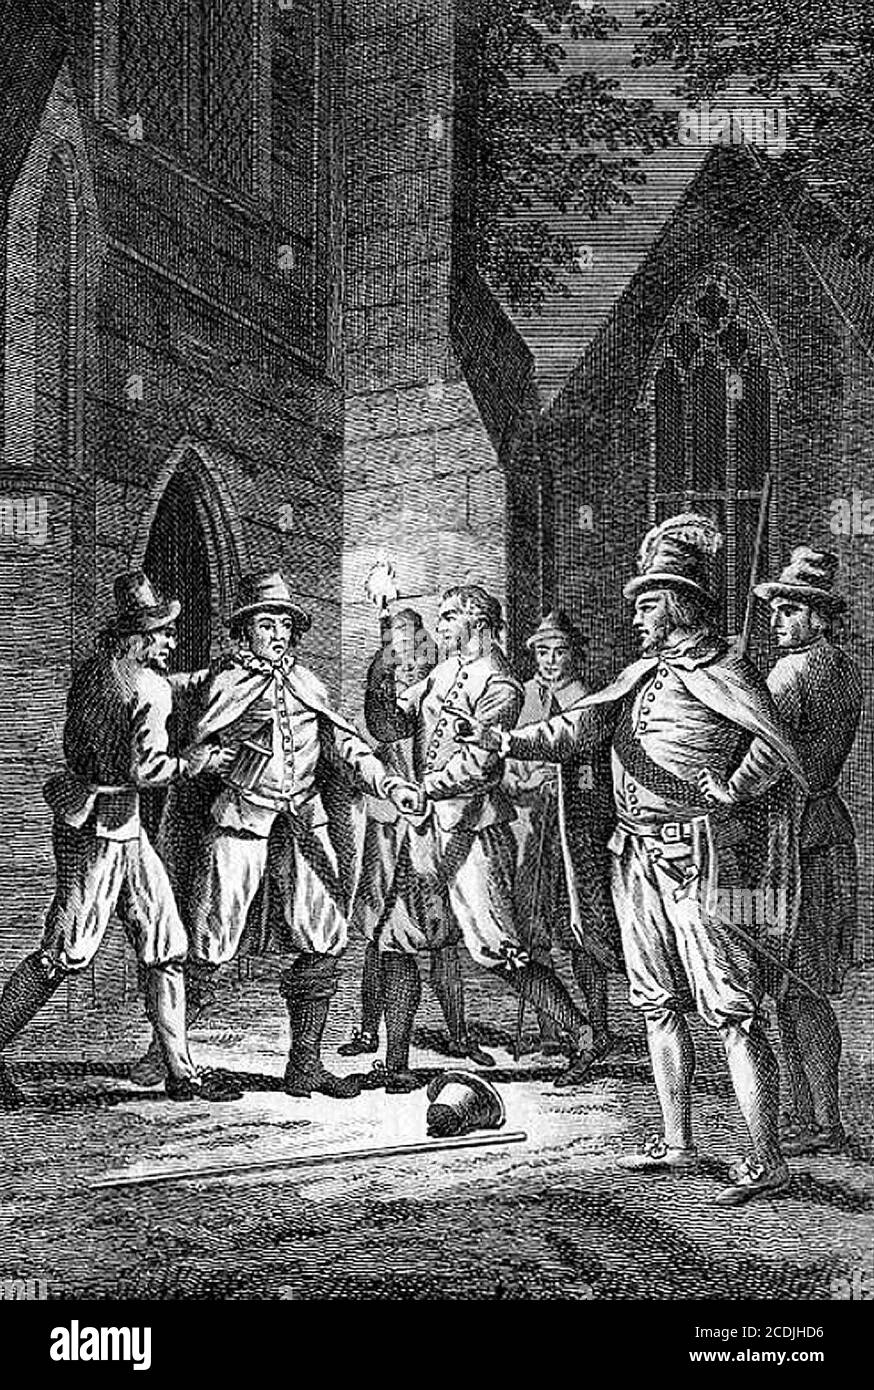 Guy Fawkes. Sir Thomas Knevet ordering the arrest of Guy Fawkes, etching, c.1800 Stock Photo